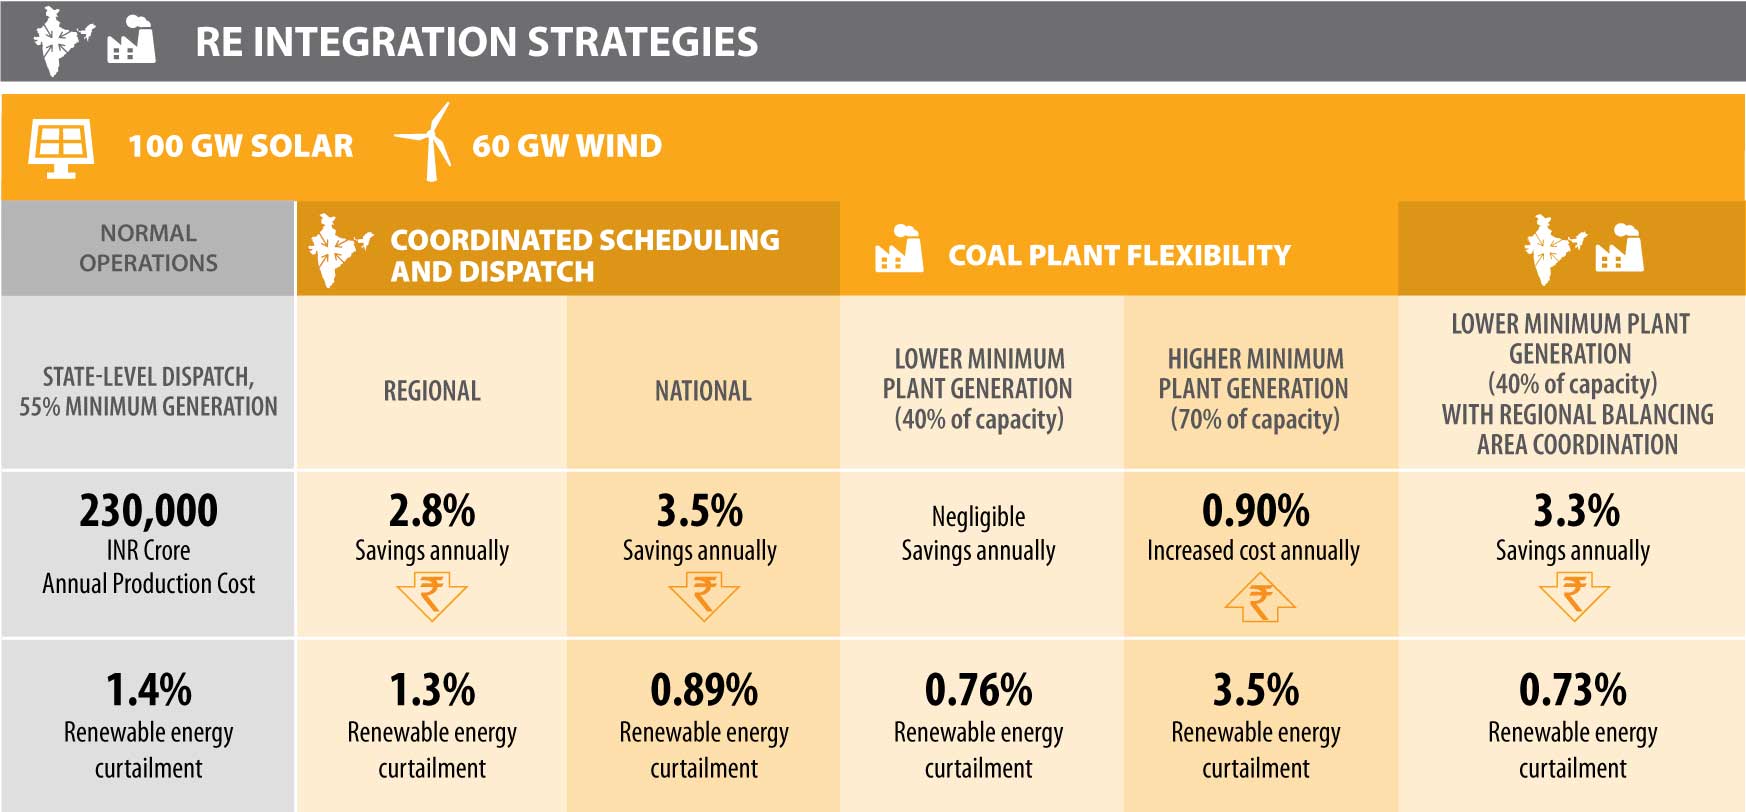 Table displaying the impacts of integration strategies for 100 GW of solar and 60 GW of wind under different scenarios. Normal operations, detailed in the first column, consist of state-level dispatch with 55% minimum generation; 230,000 INR crore annual production cost, and 1.4% renewable energy curtailment. Regional coordinated scheduling and dispatch, detailed in the second column, results in 2.8% savings annually and 1.3% renewable energy curtailment. National coordinated scheduling and dispatch, detailed in the third column, results in 3.5% savings annually and 0.89% renewable energy curtailment. Lower minimum coal plant generation—at 40% of capacity—detailed in the fourth column results in negligible savings annually and 0.76% renewable energy curtailment. Higher minimum coal plant generation—at 70% of capacity—detailed in the fifth column results in 0.90% increased cost annually and 3.5% renewable energy curtailment. Finally, lower minimum coal plant generation (40% of capacity) with regional balancing area coordination results in 3.3% savings annually and 0.73% renewable energy curtailment.